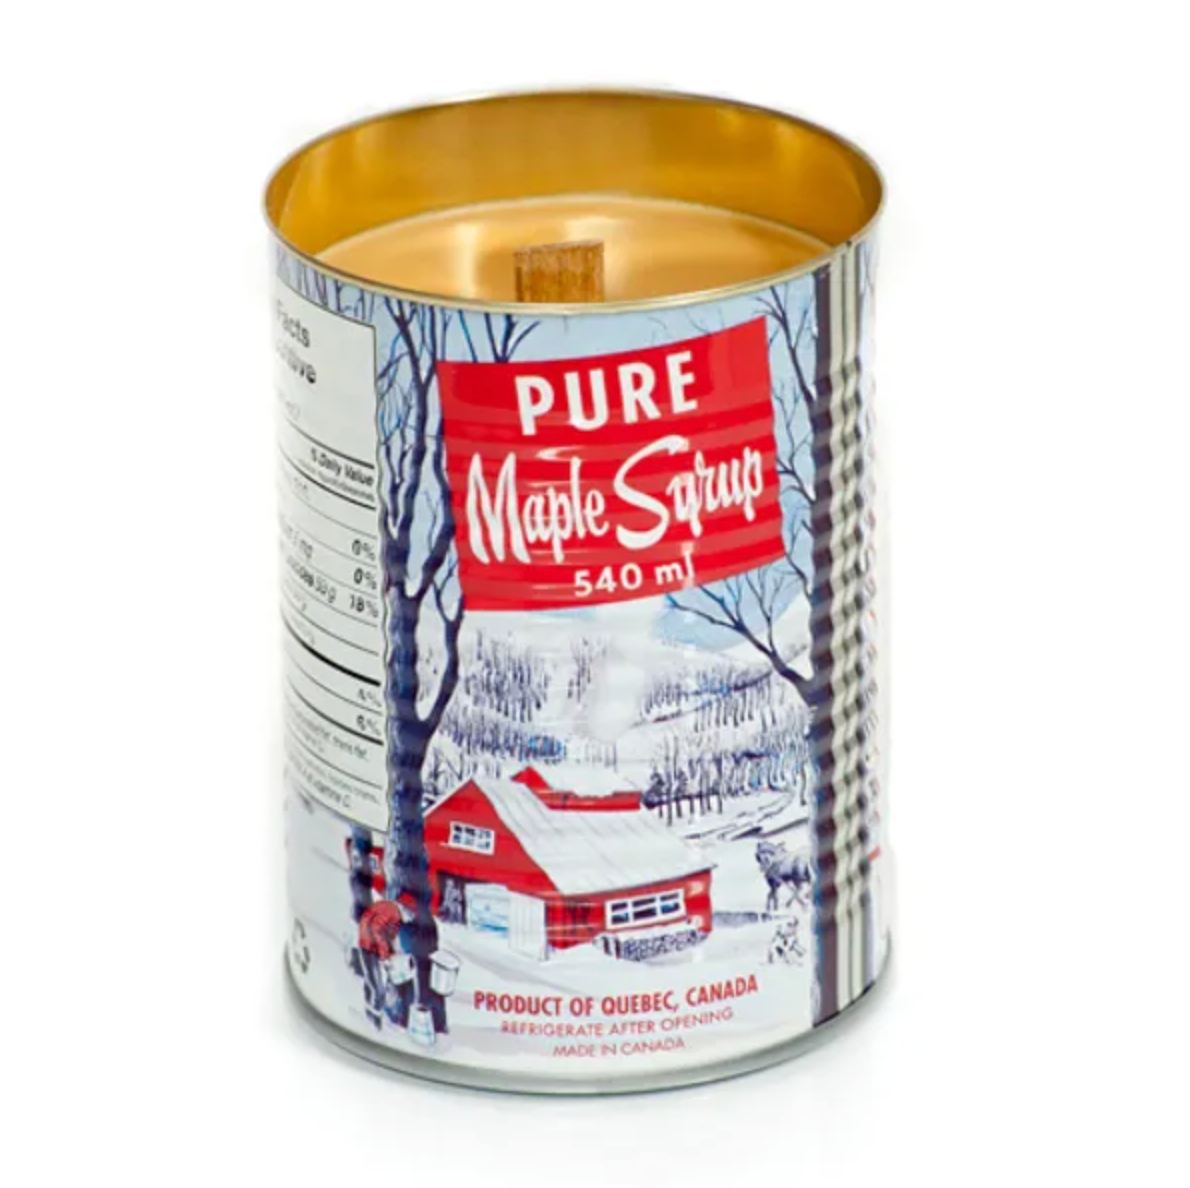 Maple Syrup Candle